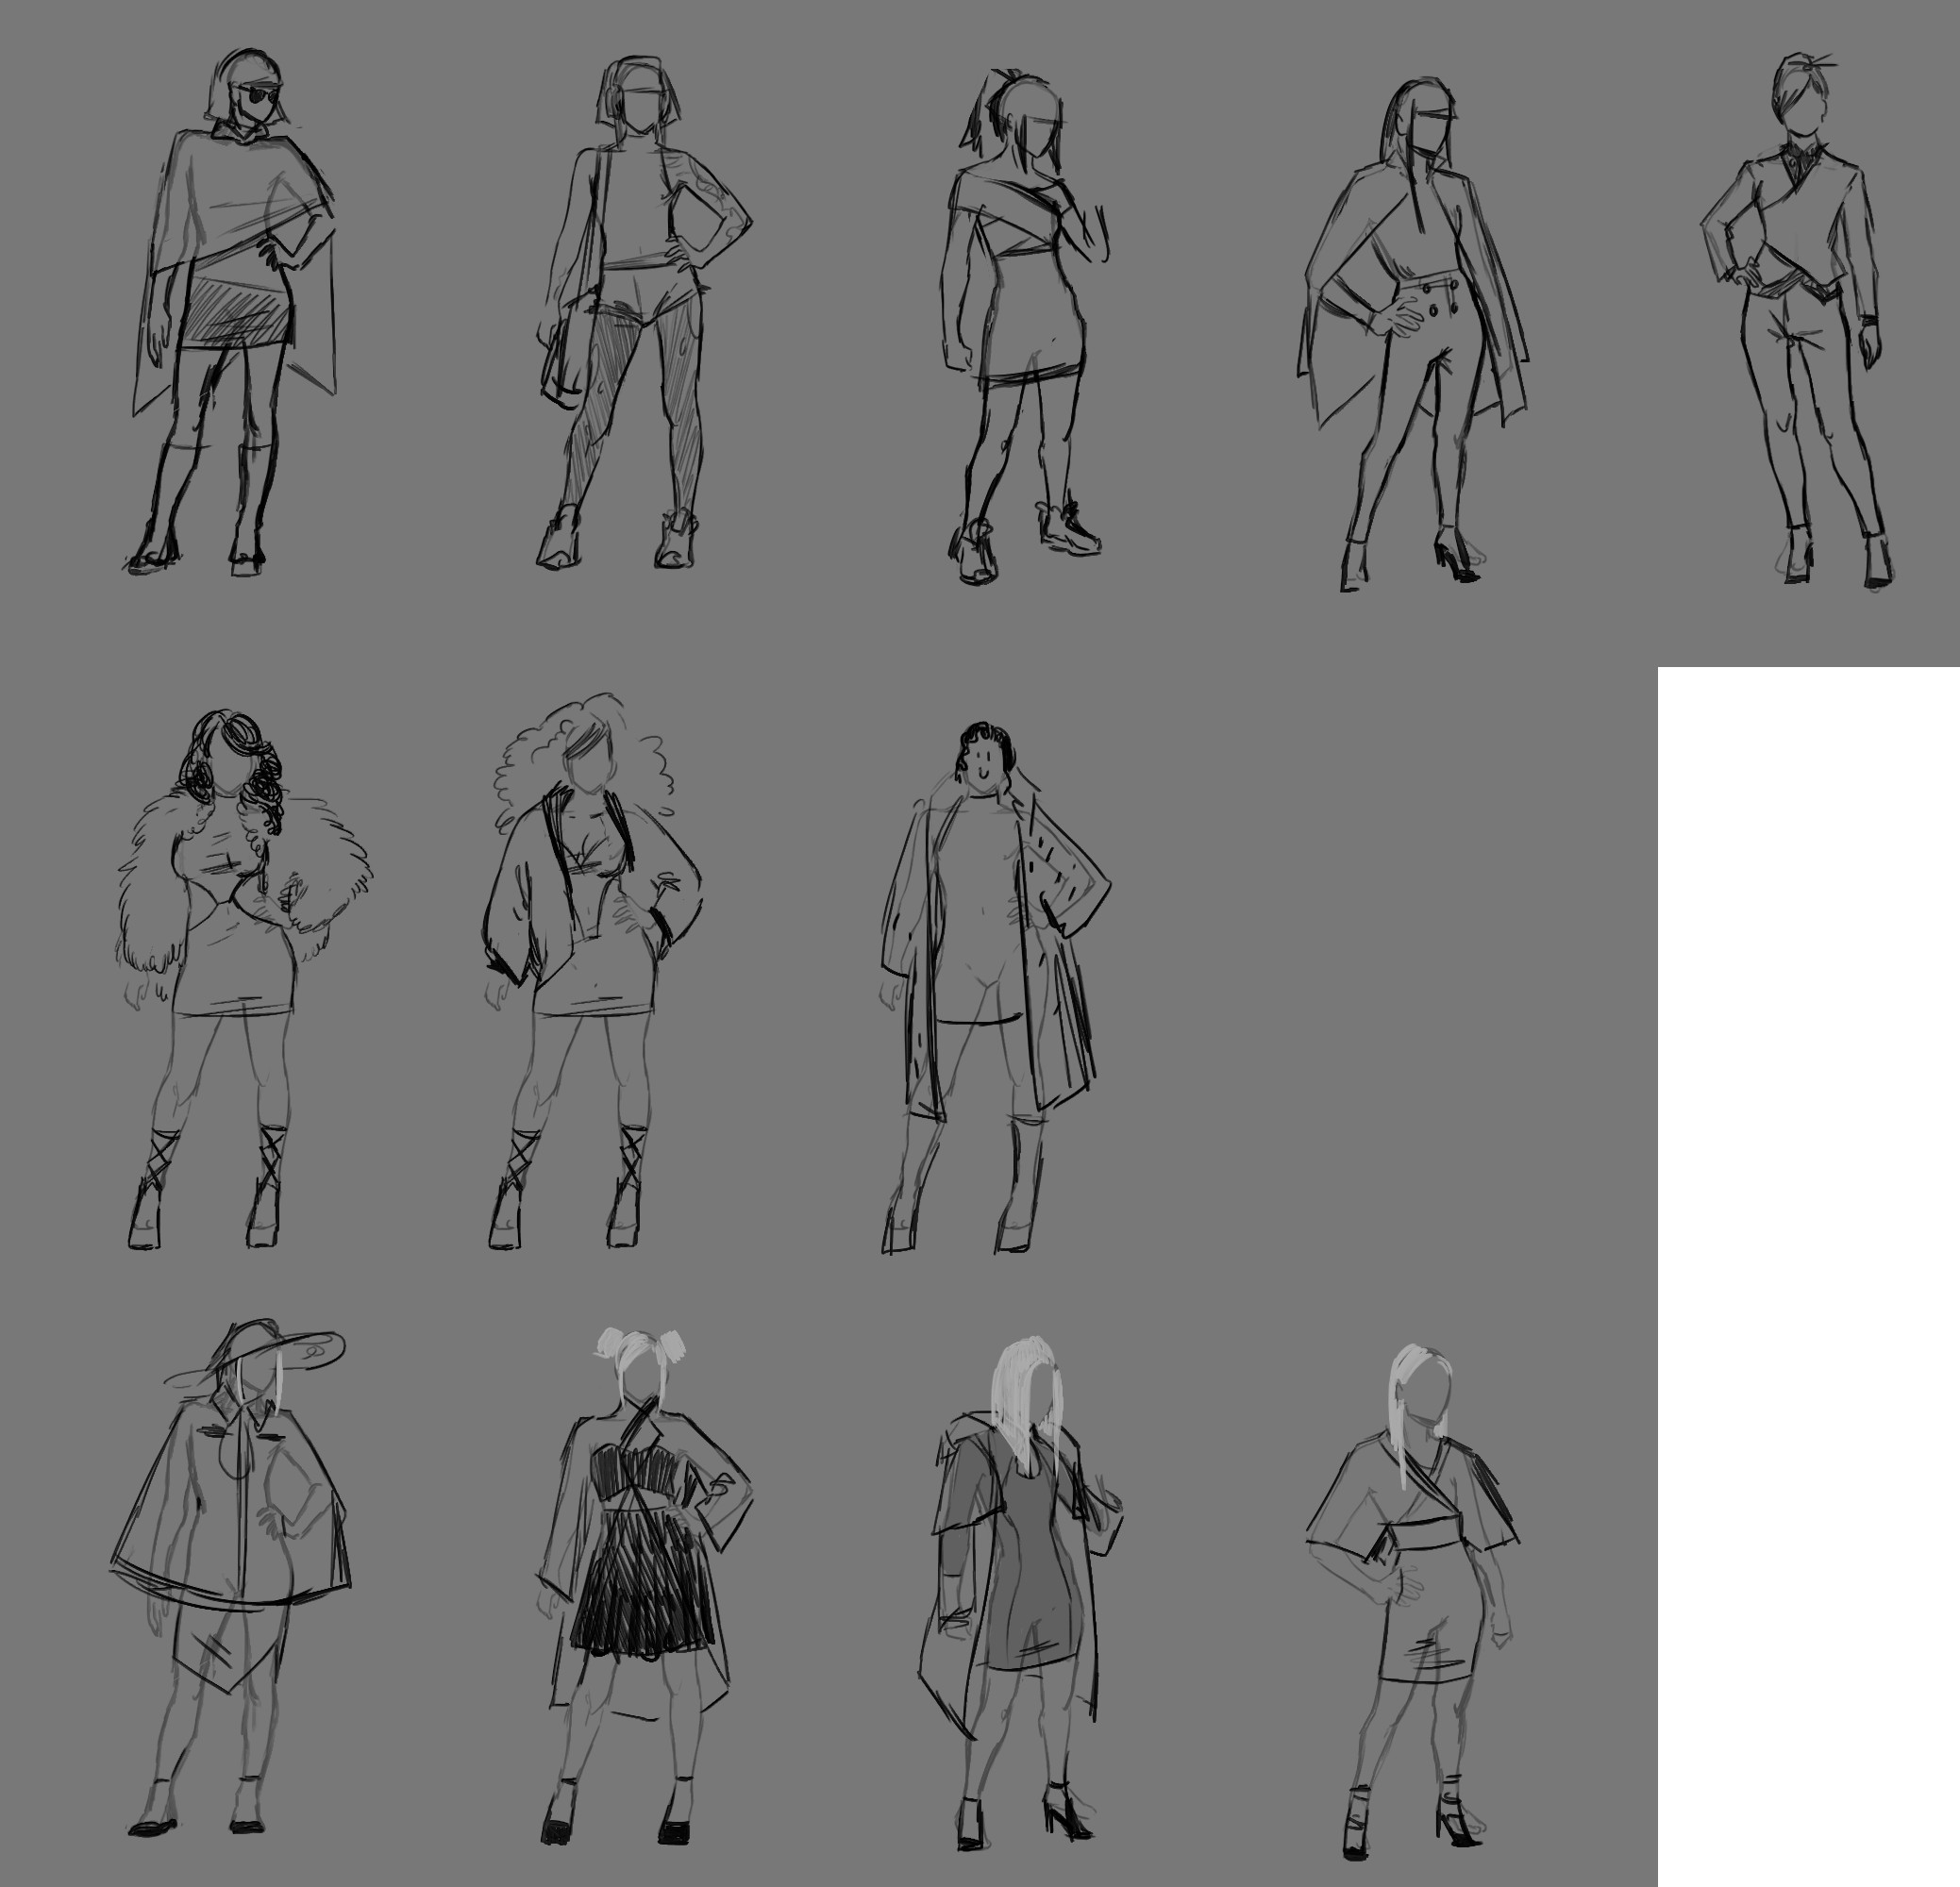 first sketches with different outfits. 